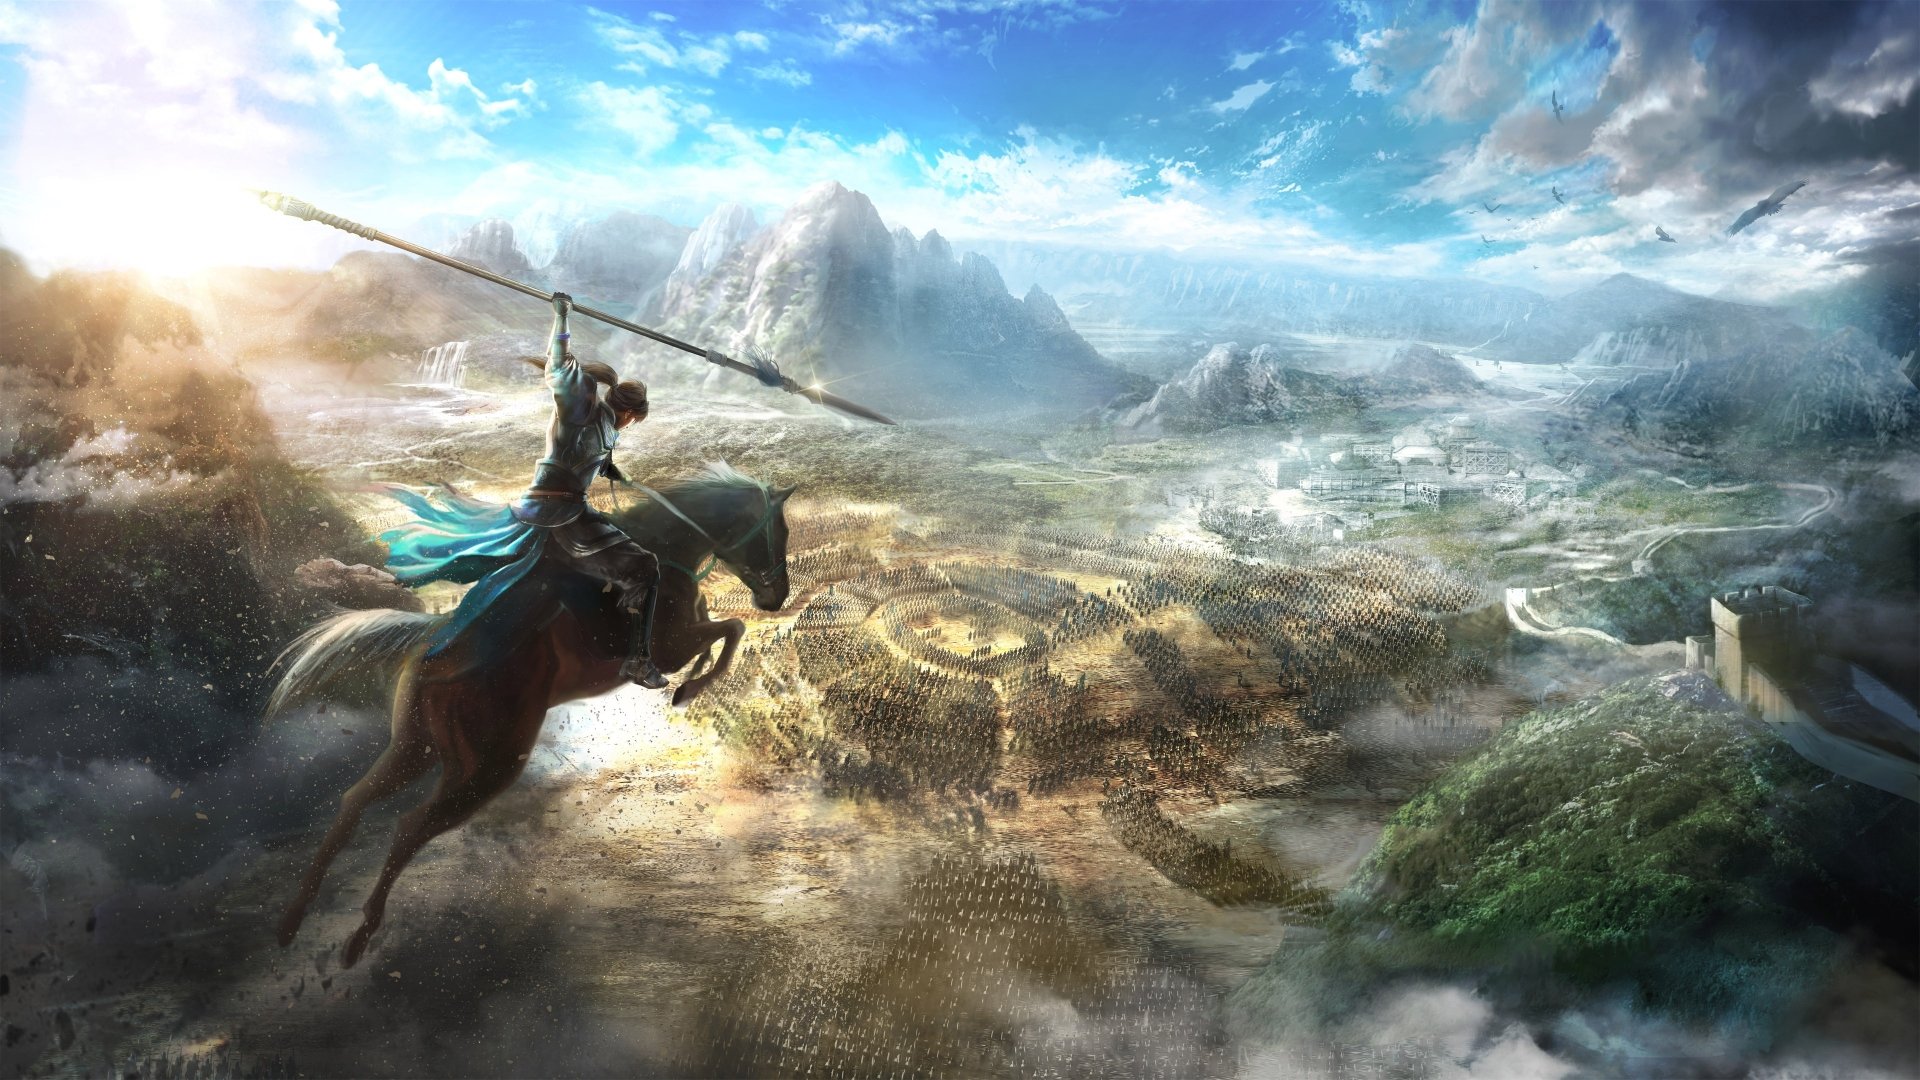 dynasty warriors 8 characters wallpaper